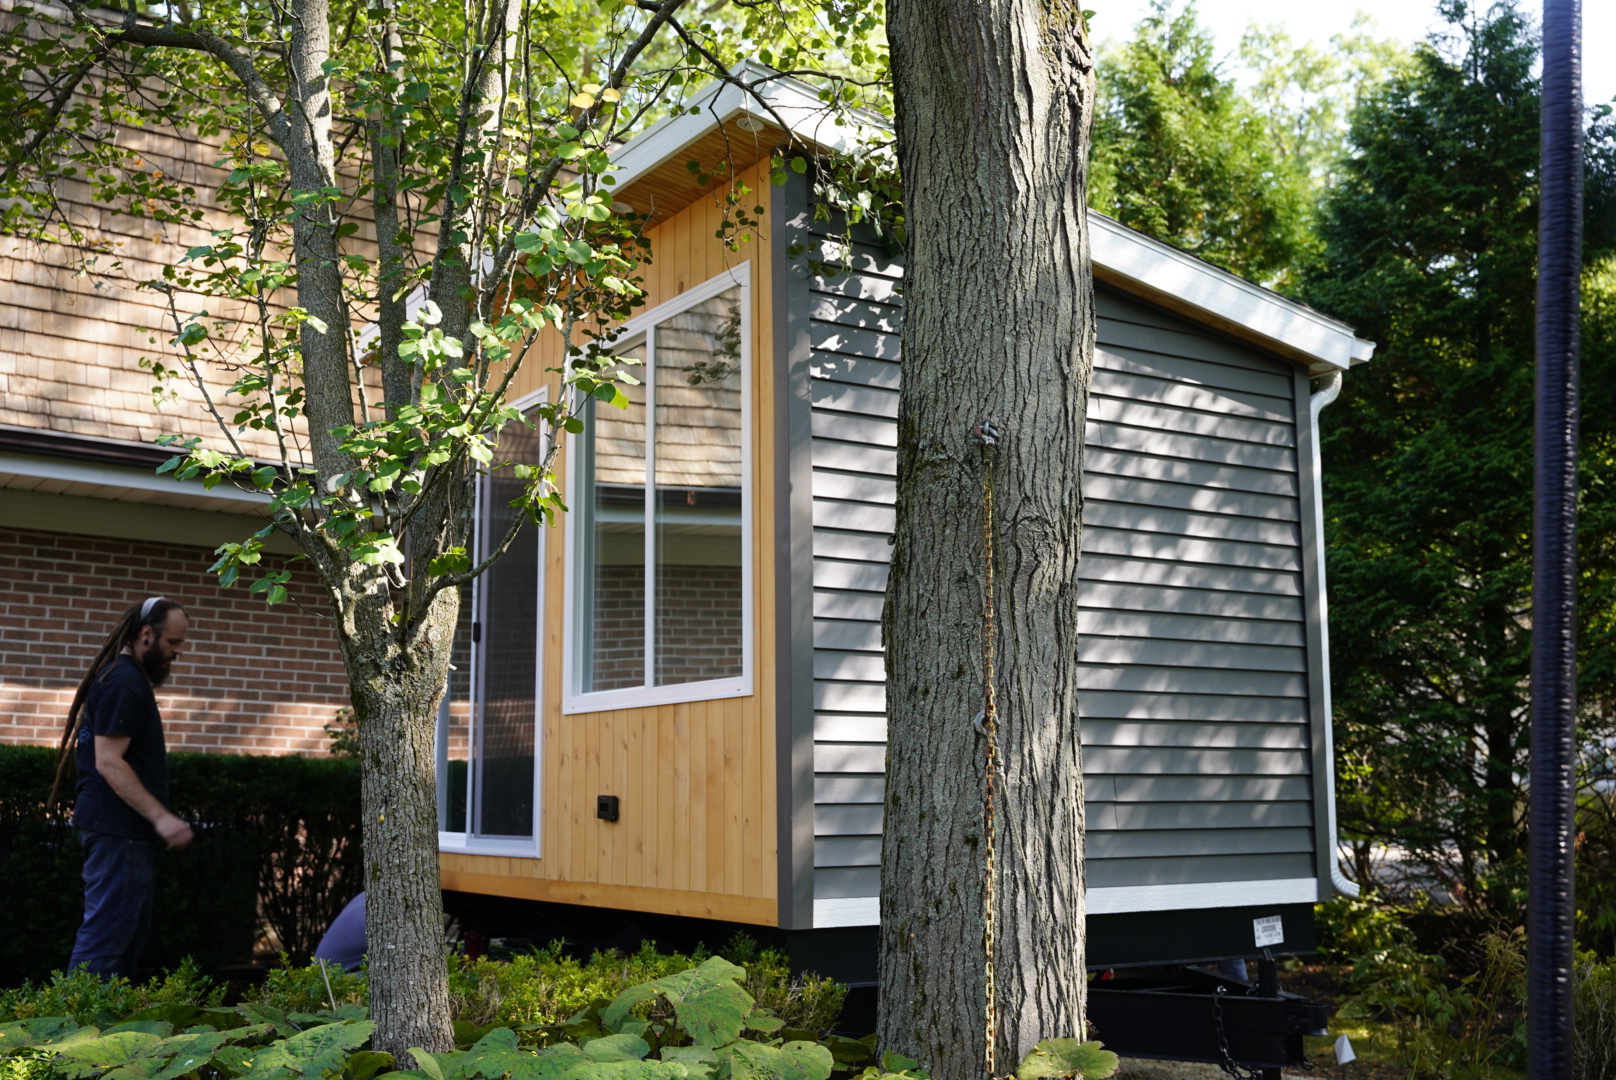 Moving your Tiny Home or Shed made easy